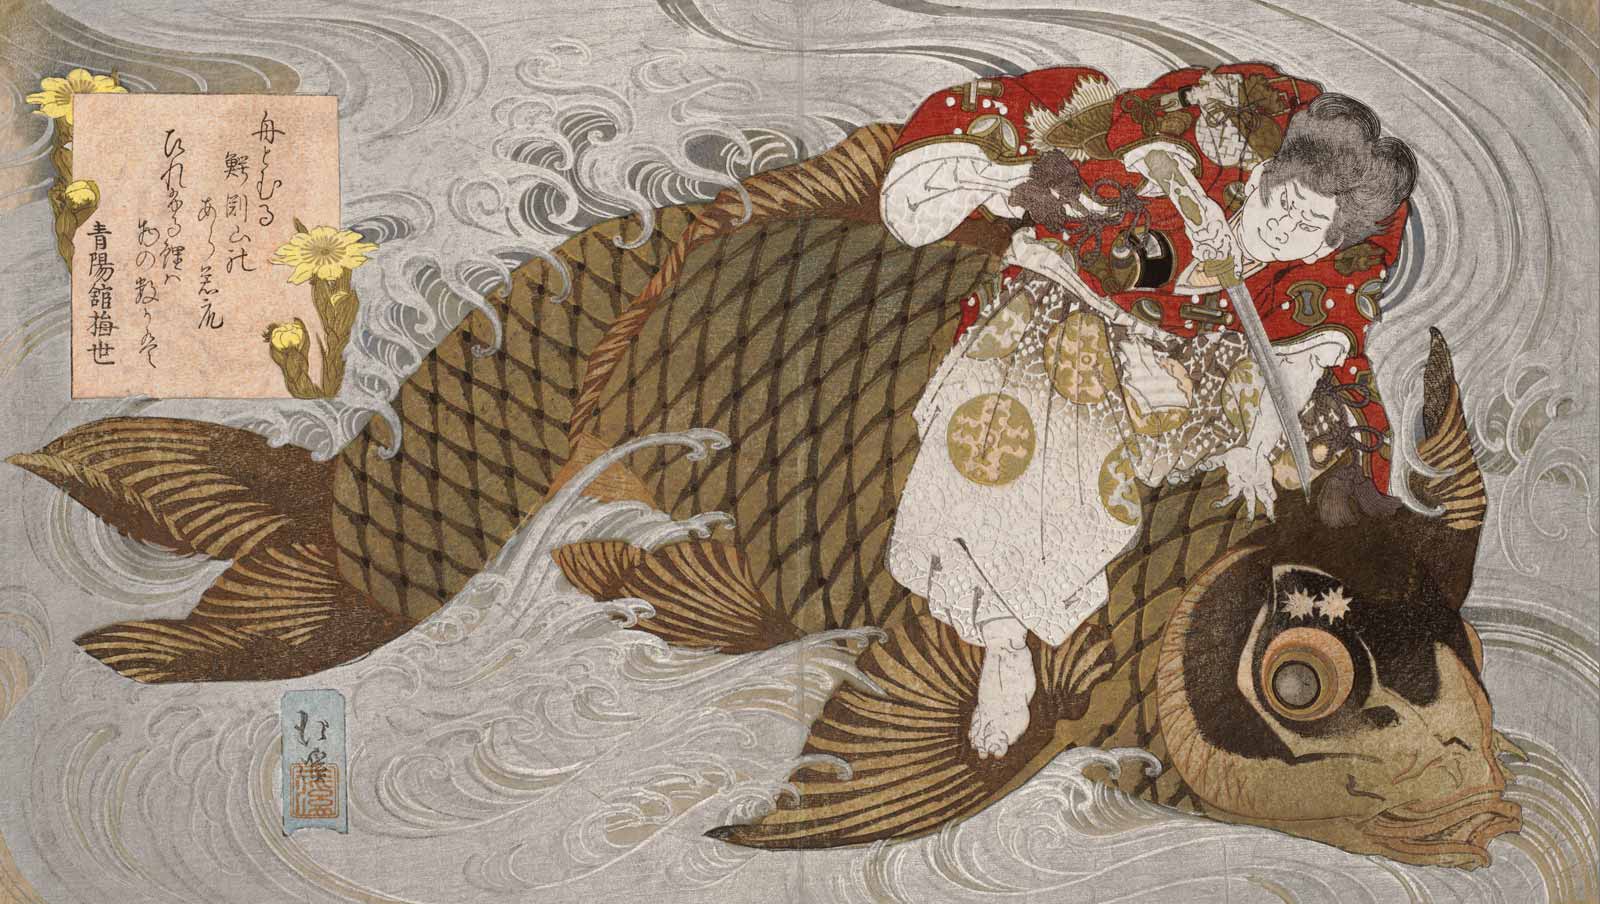 Images of Women in Japanese Painting and Woodblock prints - National Museum  in Krakow